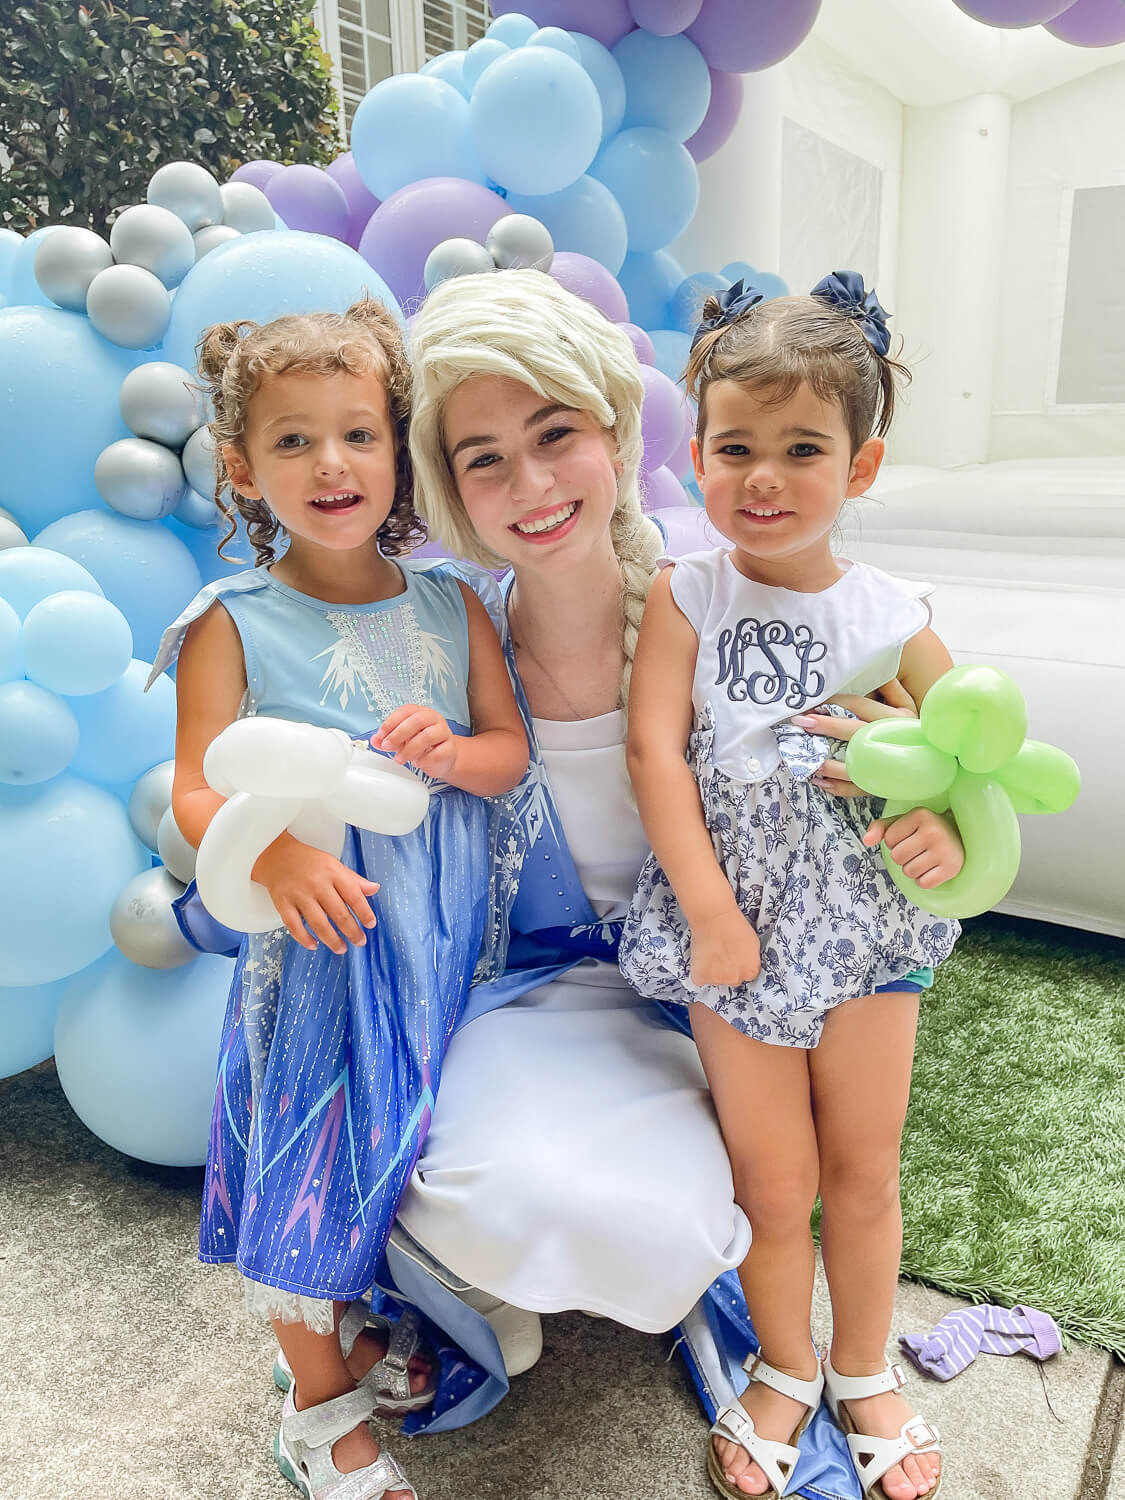 toddler girl and woman dressed like Elsa from Frozen